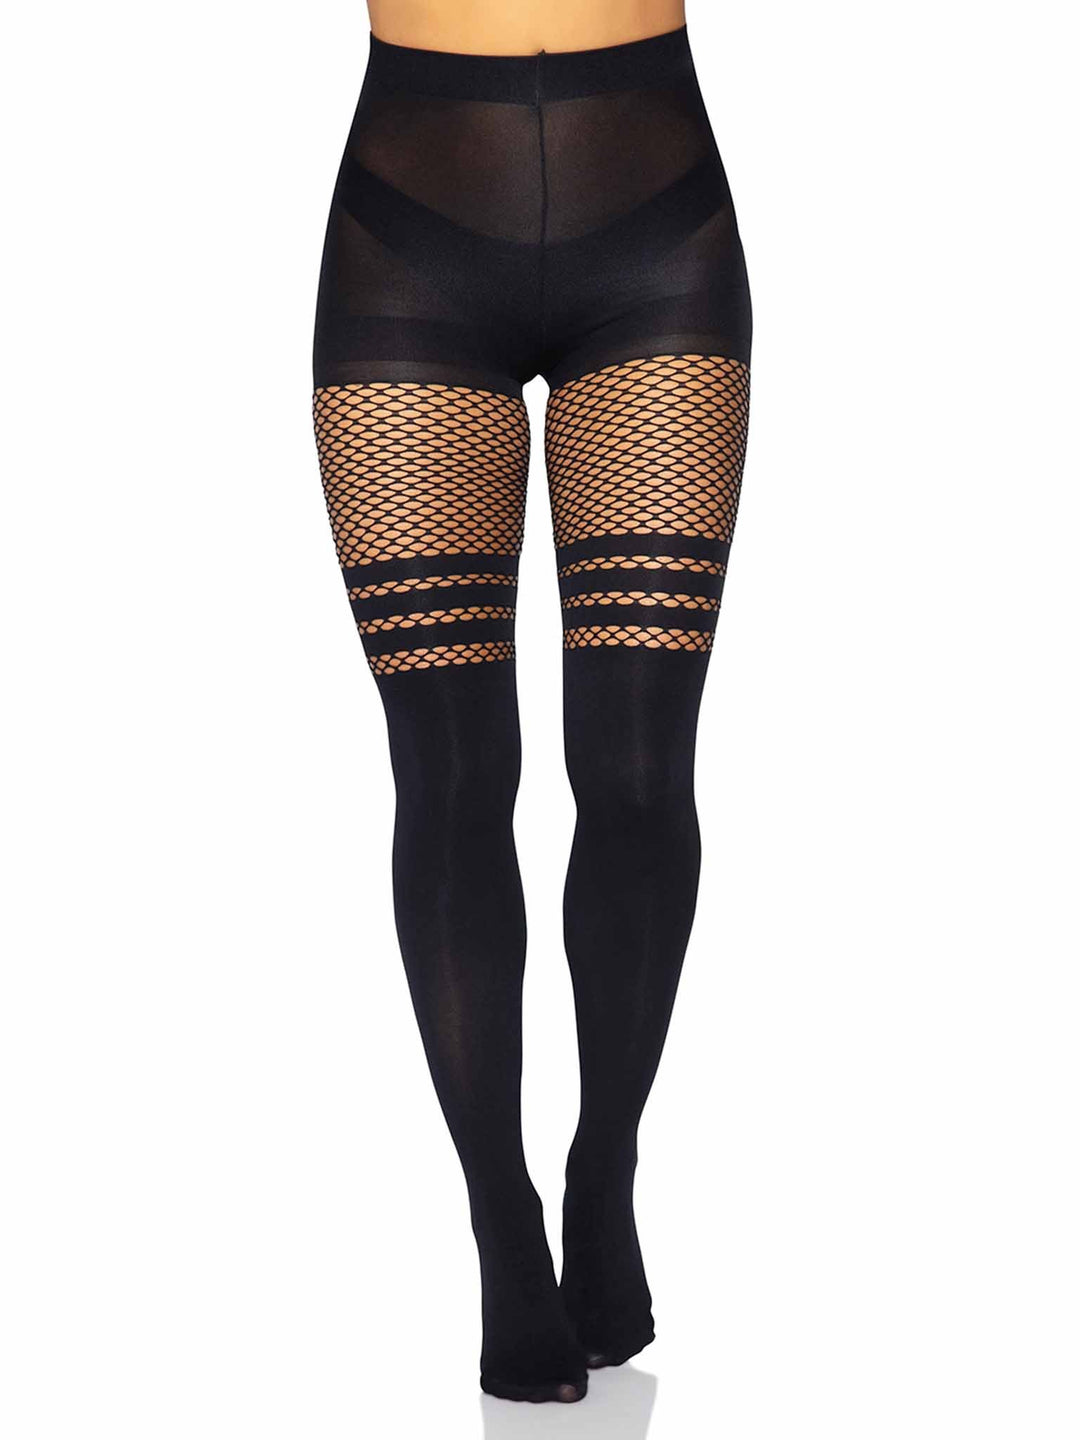 Opaque Faux Thigh High Pantyhose with Fishnet Thigh